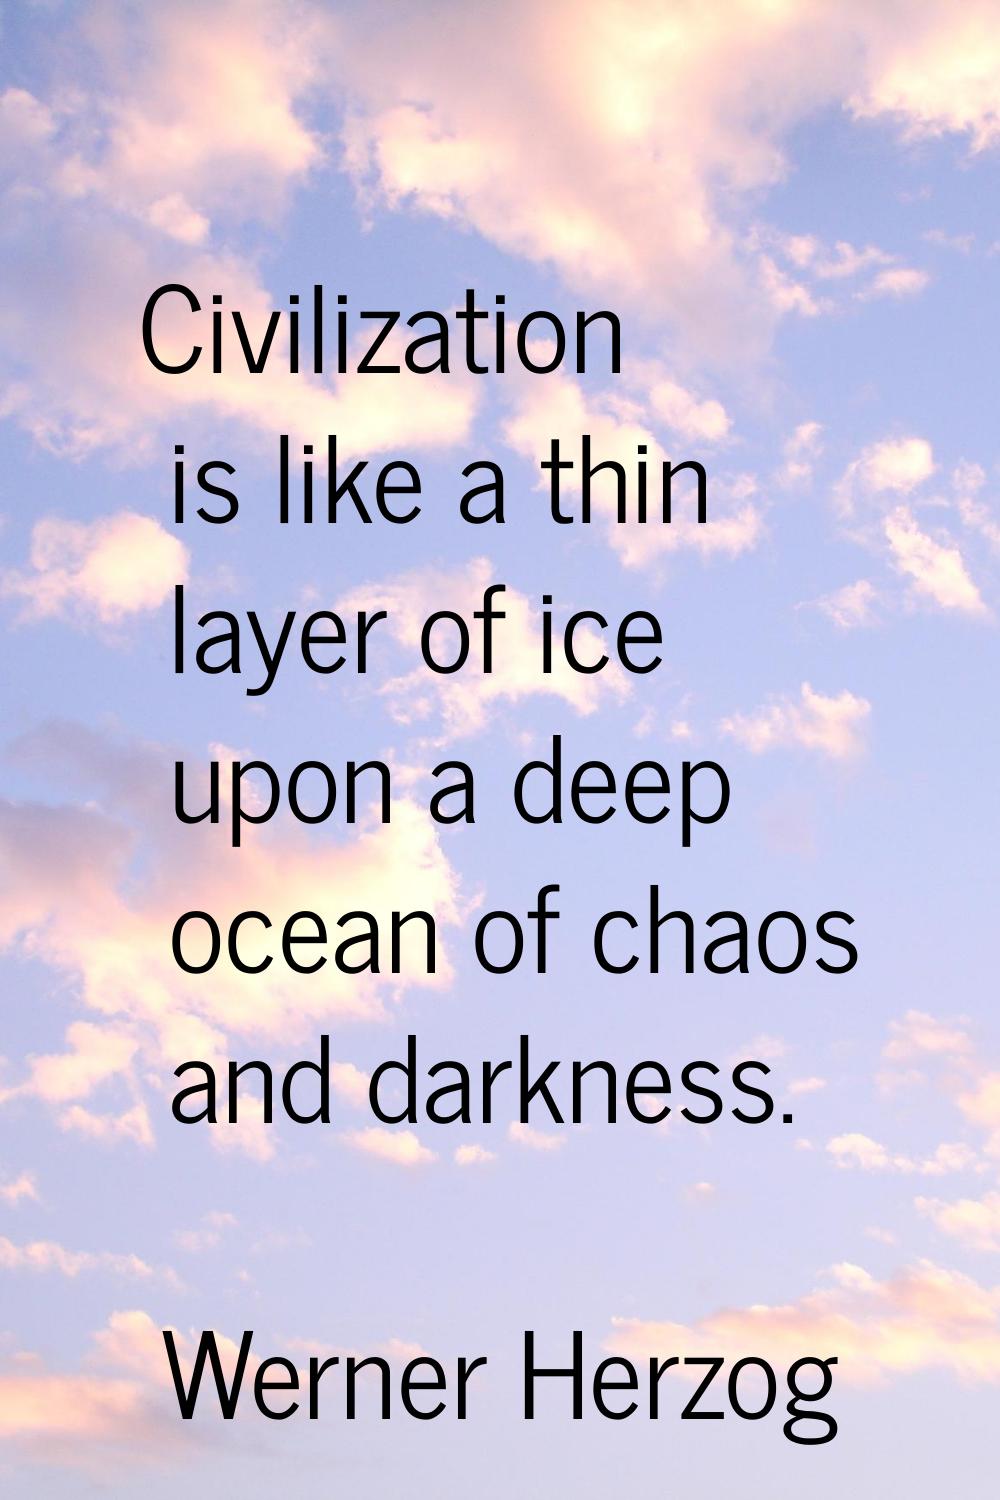 Civilization is like a thin layer of ice upon a deep ocean of chaos and darkness.